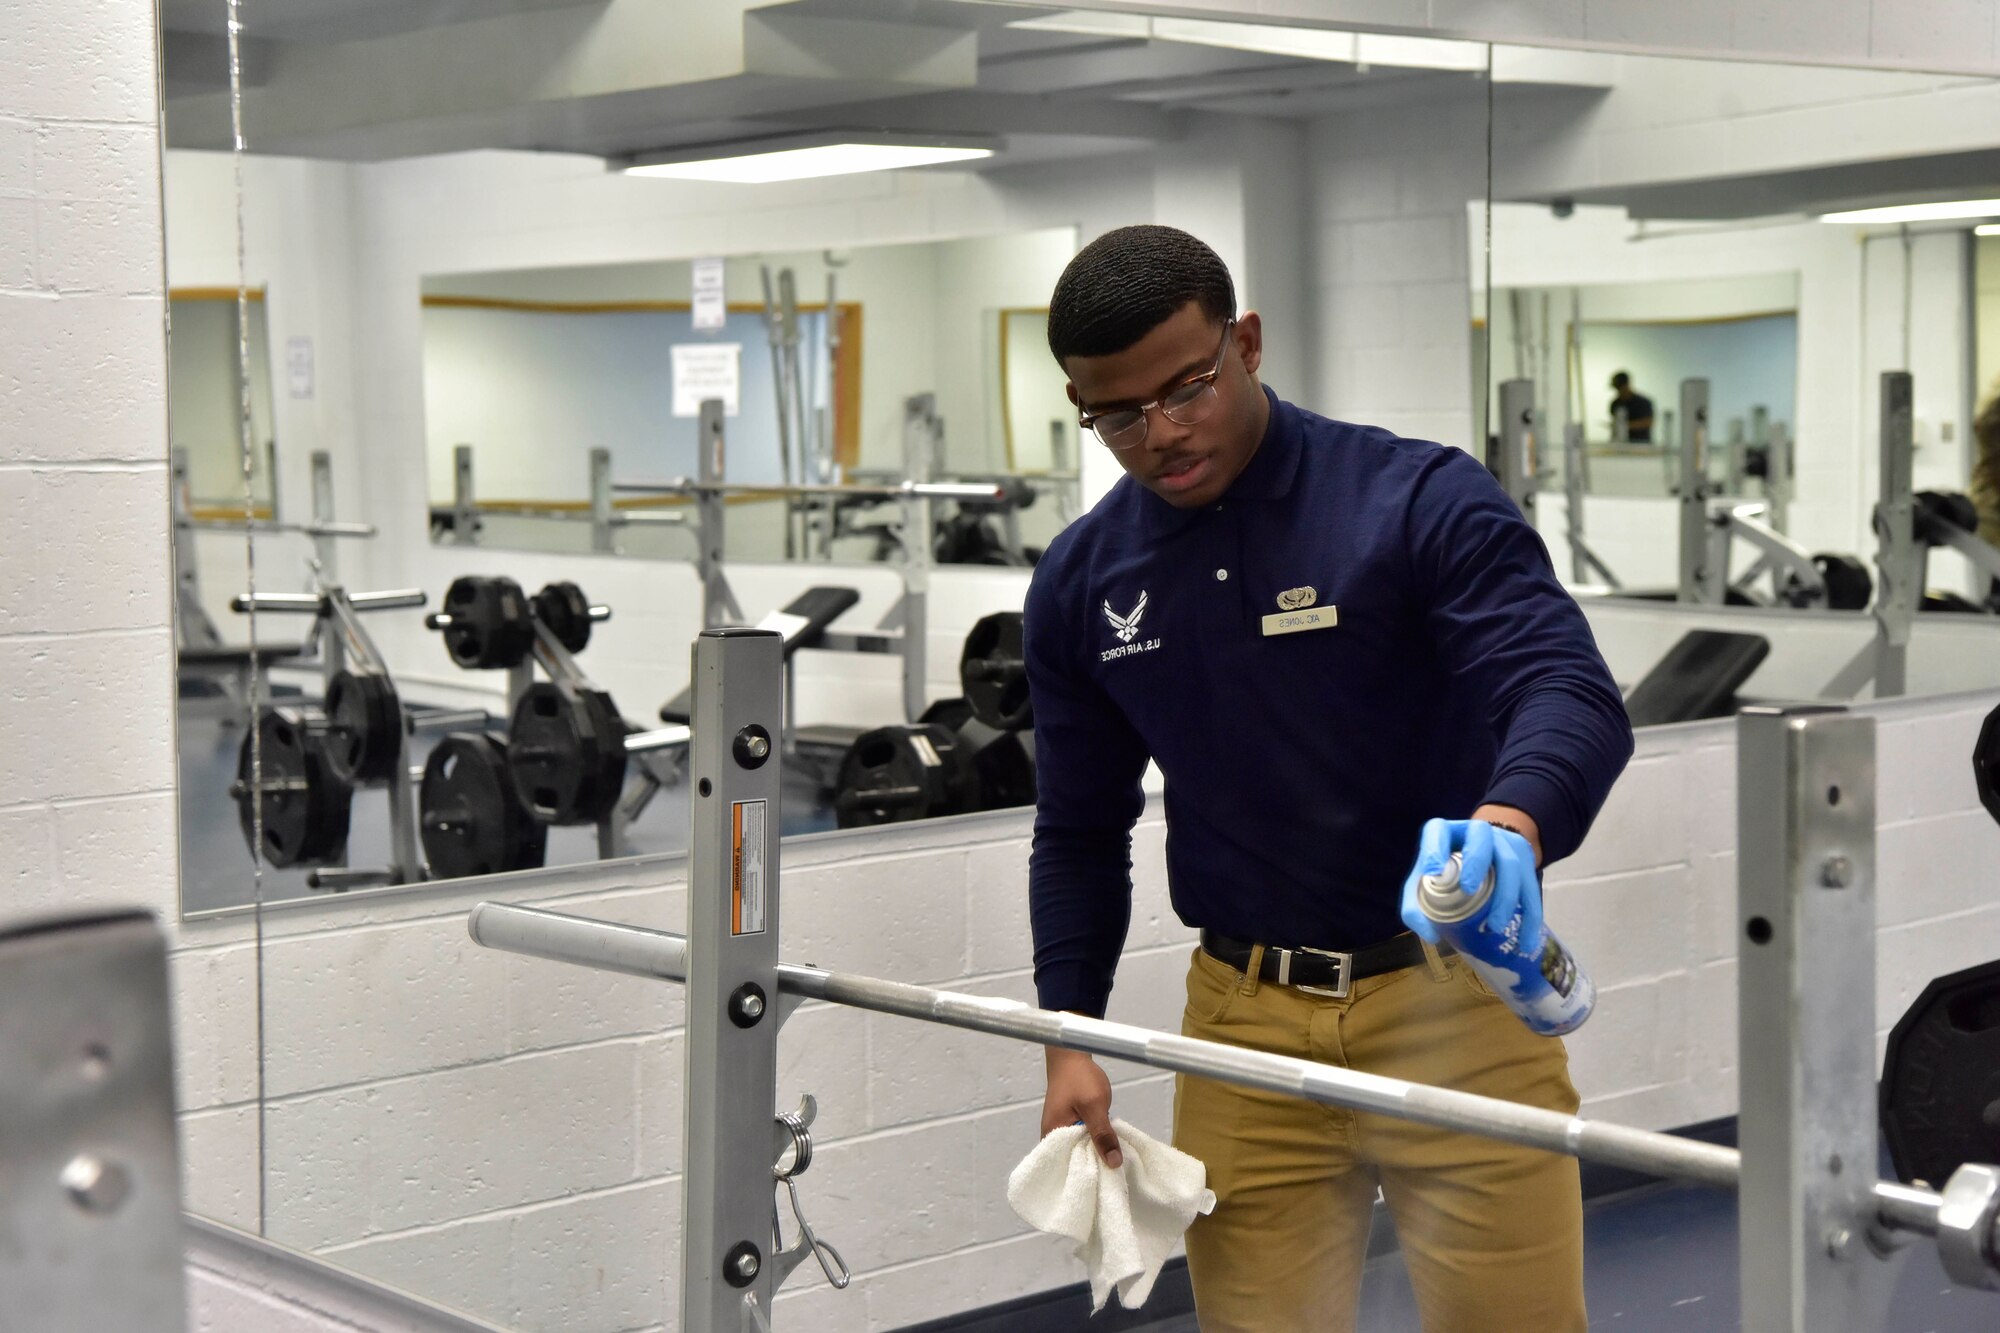 A 354th Force Support Squadron Airman sanitizes gym equipment at the Baker Fieldhouse on Eielson Air Force Base, Alaska, March 20, 2020. Fitness is a vital part of a healthy lifestyle and in the midst of the COVID-19 pandemic, the 354th FSS is taking extra precautions to ensure equipment is sanitized and clean around the clock. (U.S. Air Force photo by Senior Airman Beaux Hebert)